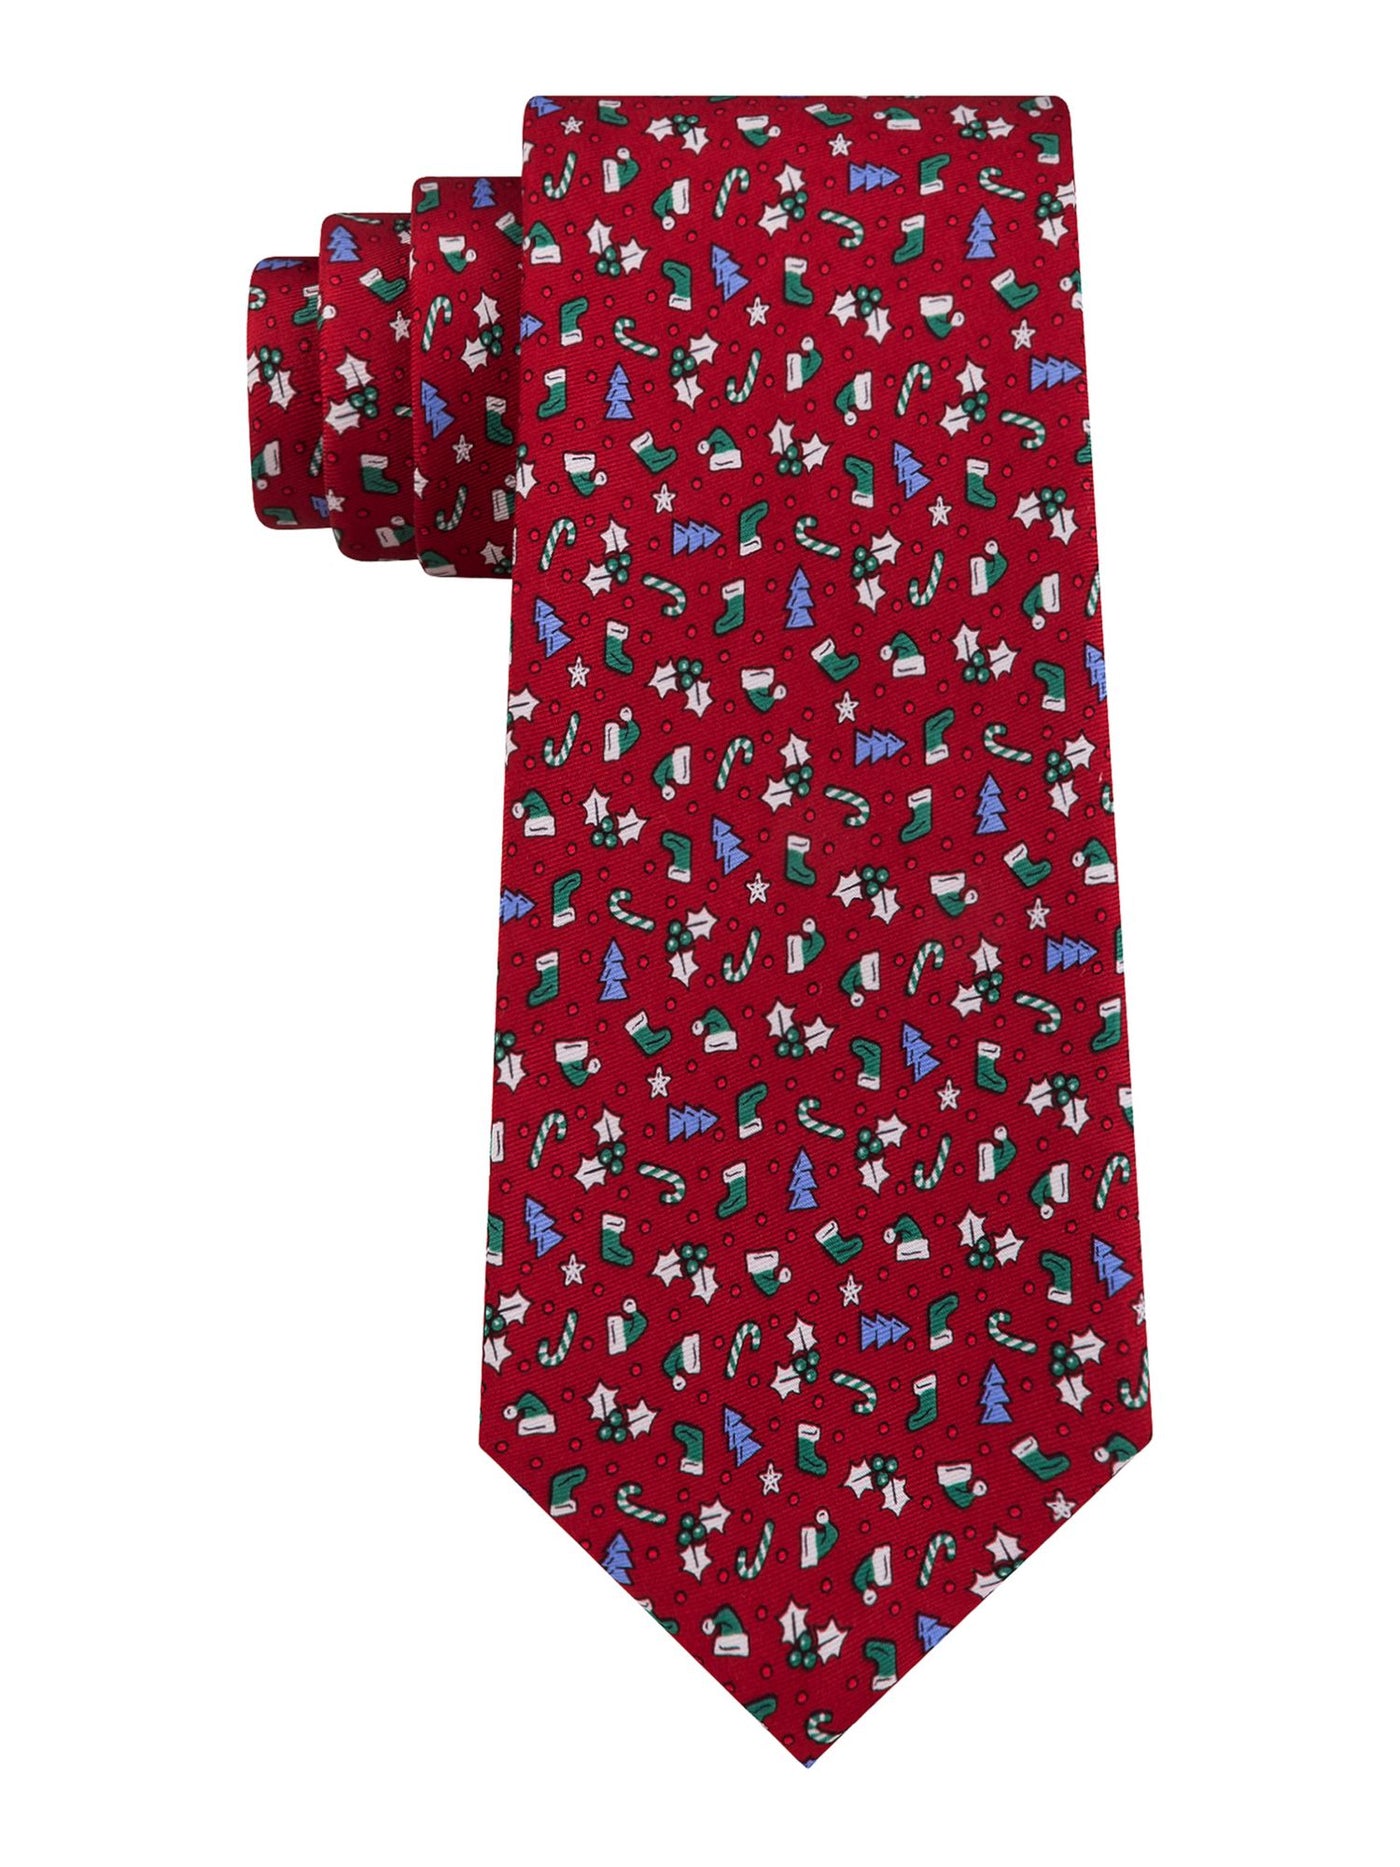 TOMMY HILFIGER Mens Red Holiday Classic Neck Tie